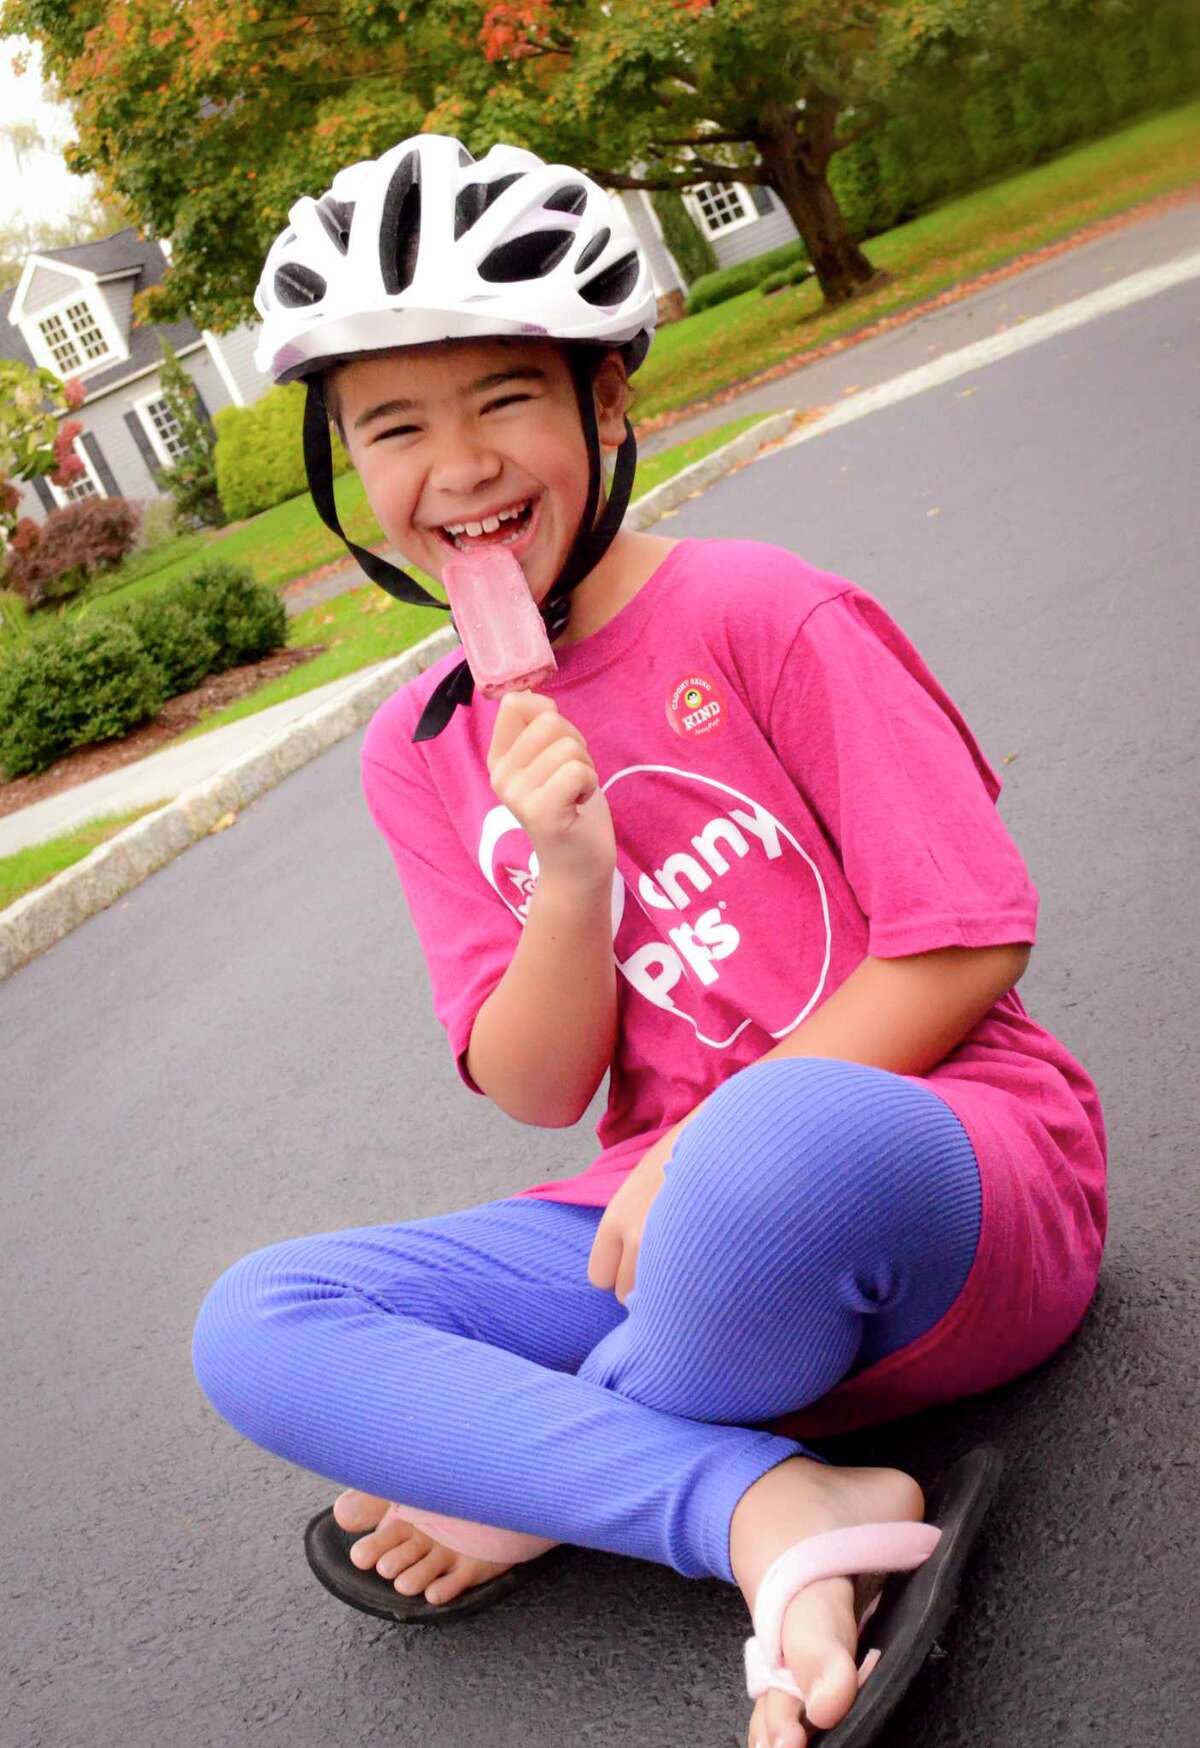 Kristina Yuan's photo of her cousin, Rachel Yuan, was chosen to represent the JonnyPops Kindness is Golden campaign. The photo will be on inserts placed in more than 2 million boxes.